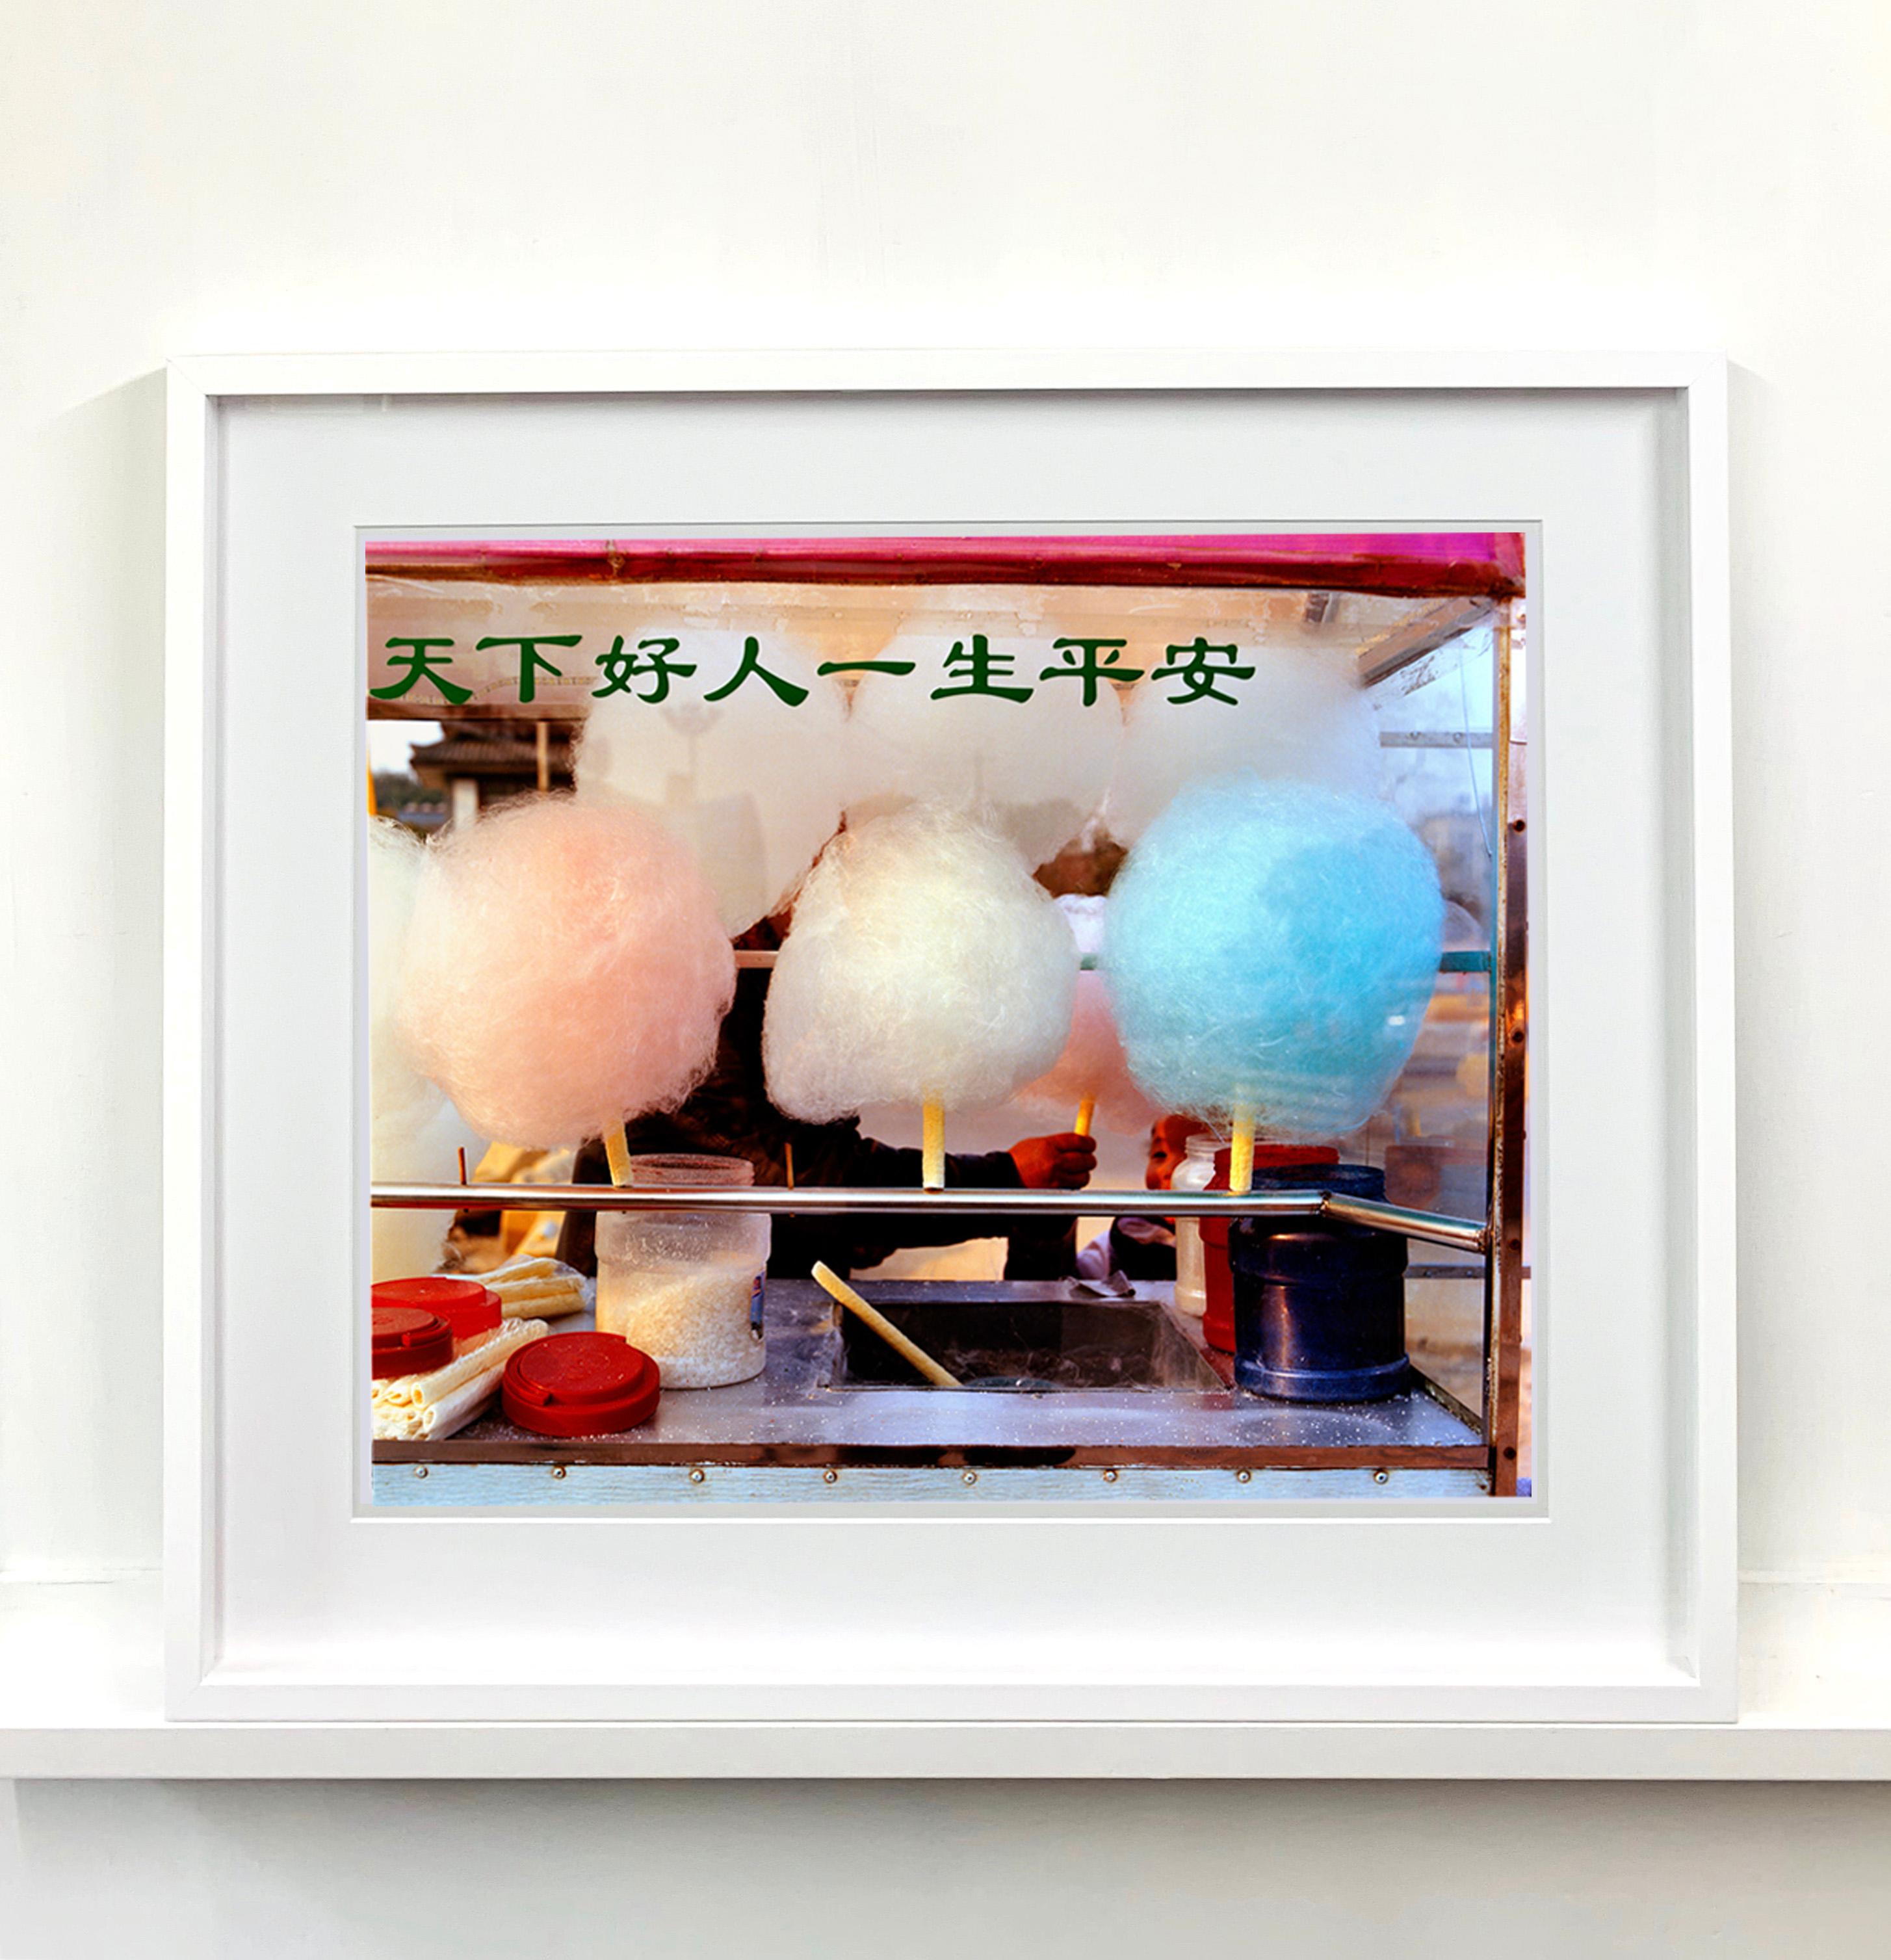 'Candy Floss' taken by Richard Heeps when travelling in china. The pops of color, the pinks and blues and the layers of detail draw you in. The Chinese Writing does not say Candy Floss/Cotton Candy for sale as you might expect, it says something